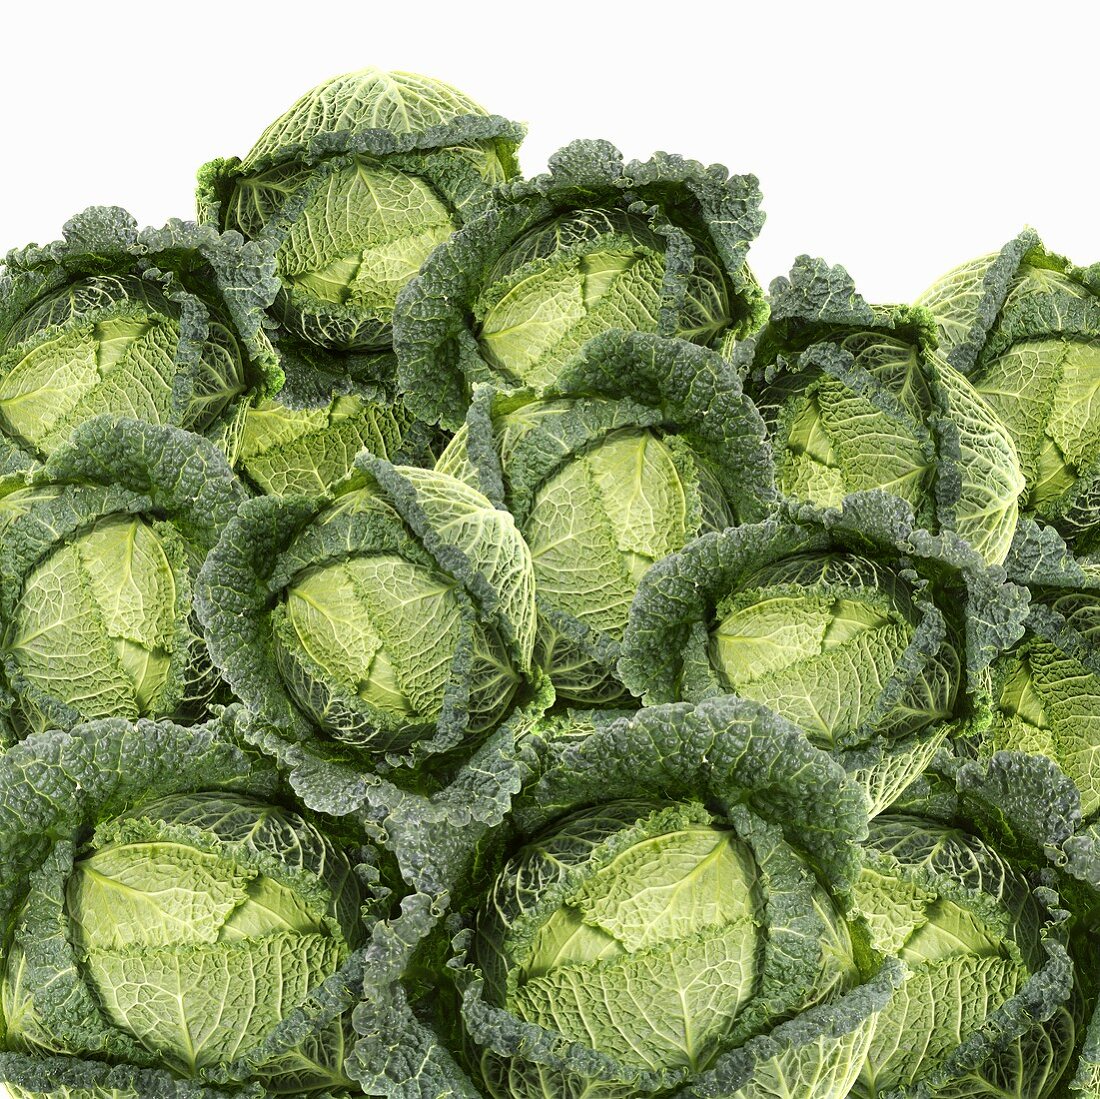 Many savoy cabbages